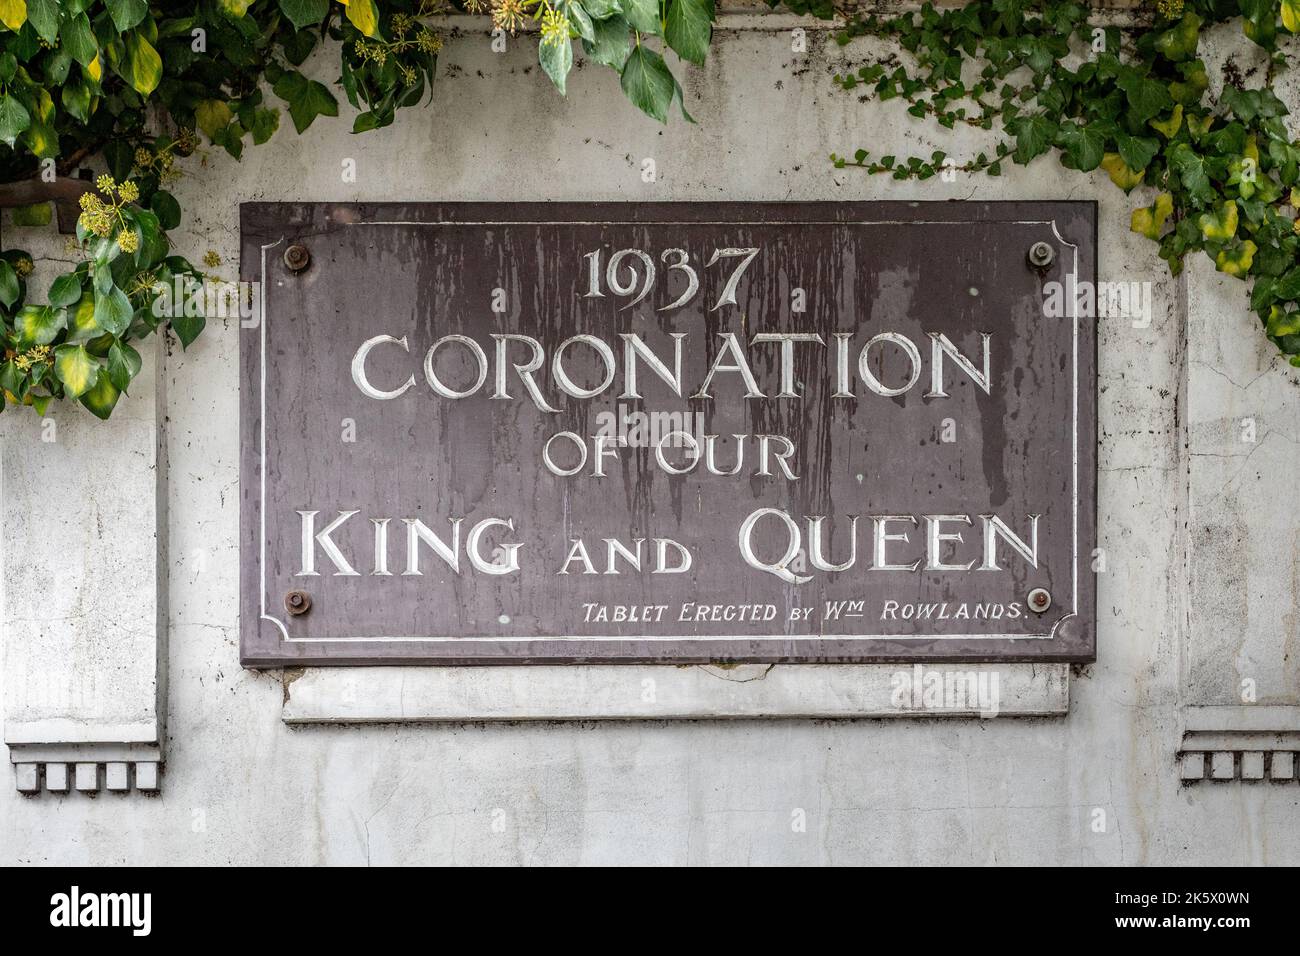 Slate wall plaque commemorating the 1937 Coronation of King George VI and Queen Elizabeth in Conwy, Gwnydd, North Wales on 5 October 2022 Stock Photo